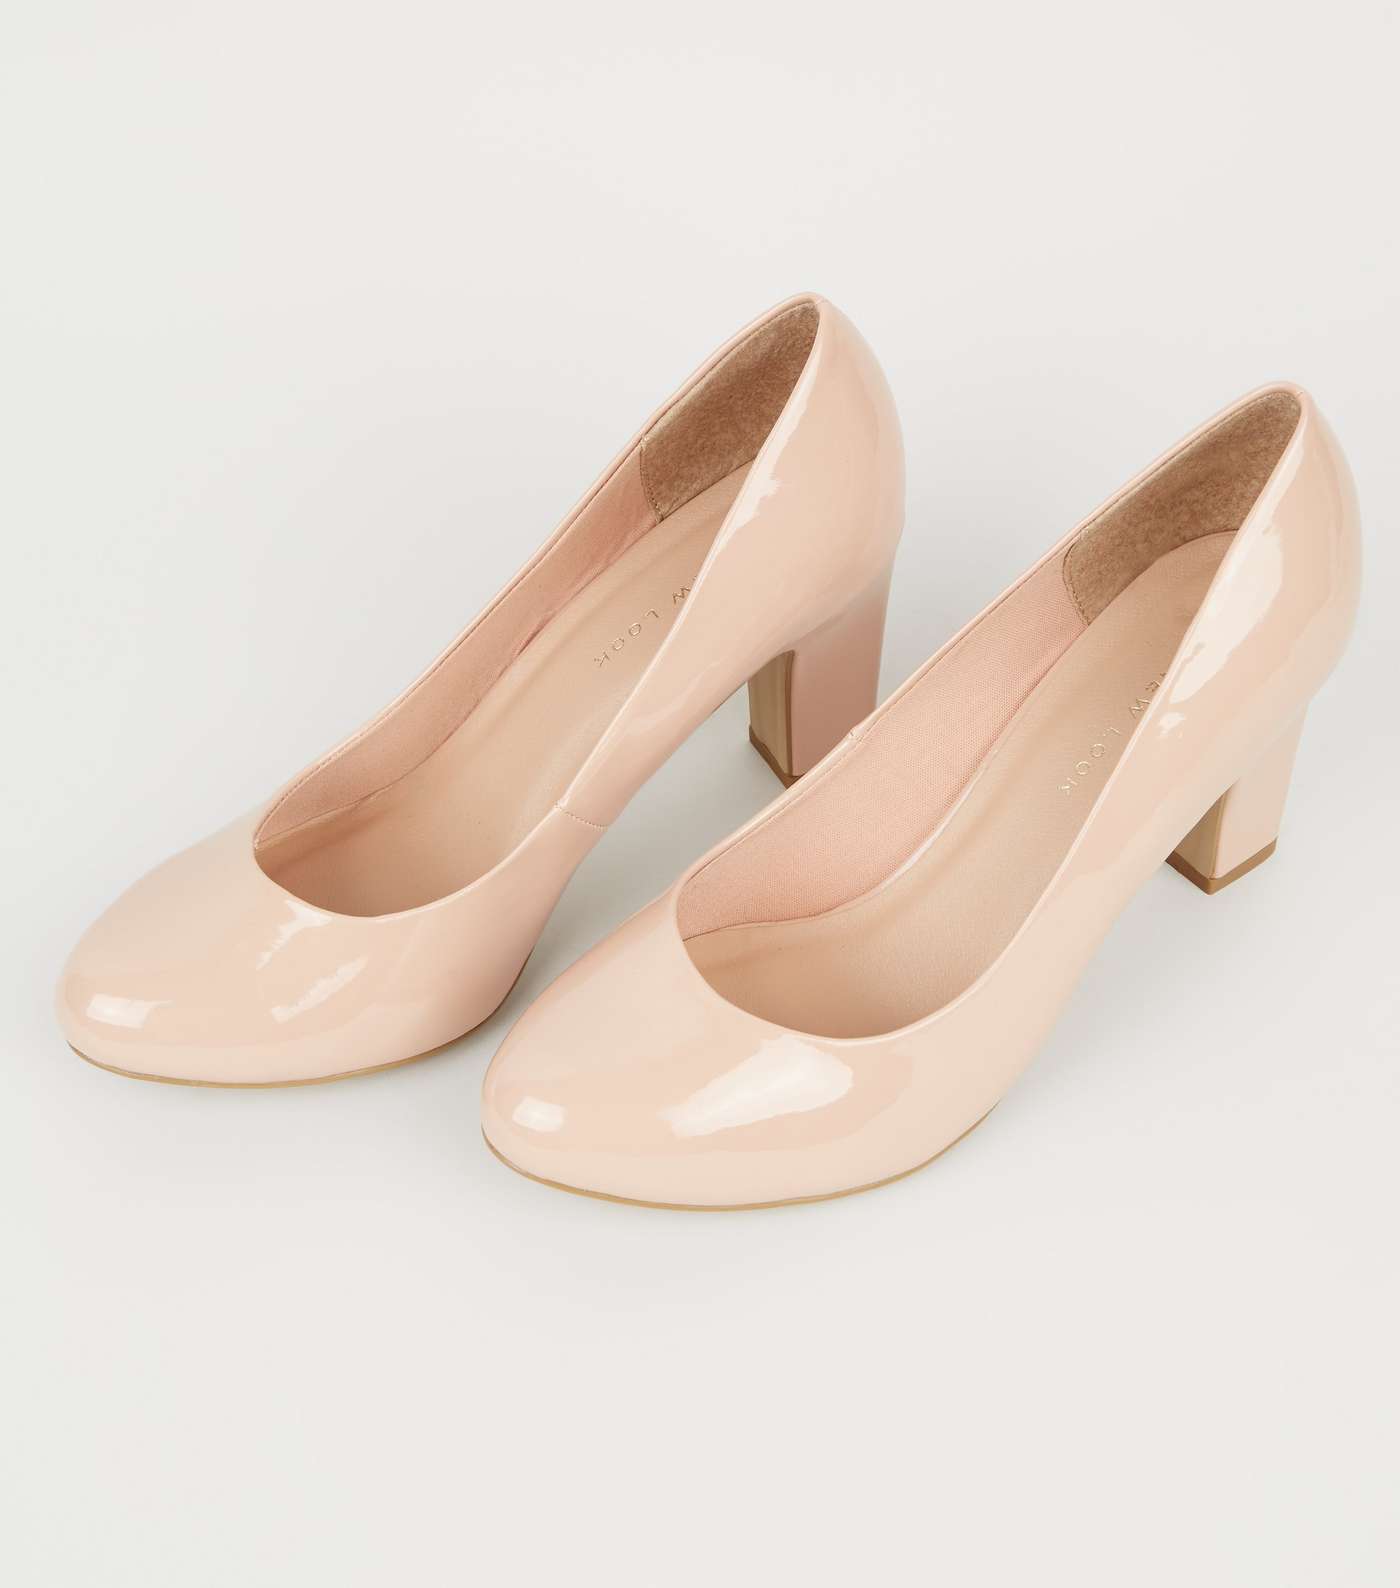 Wide Fit Pale Pink Block Heel Court Shoes Image 4